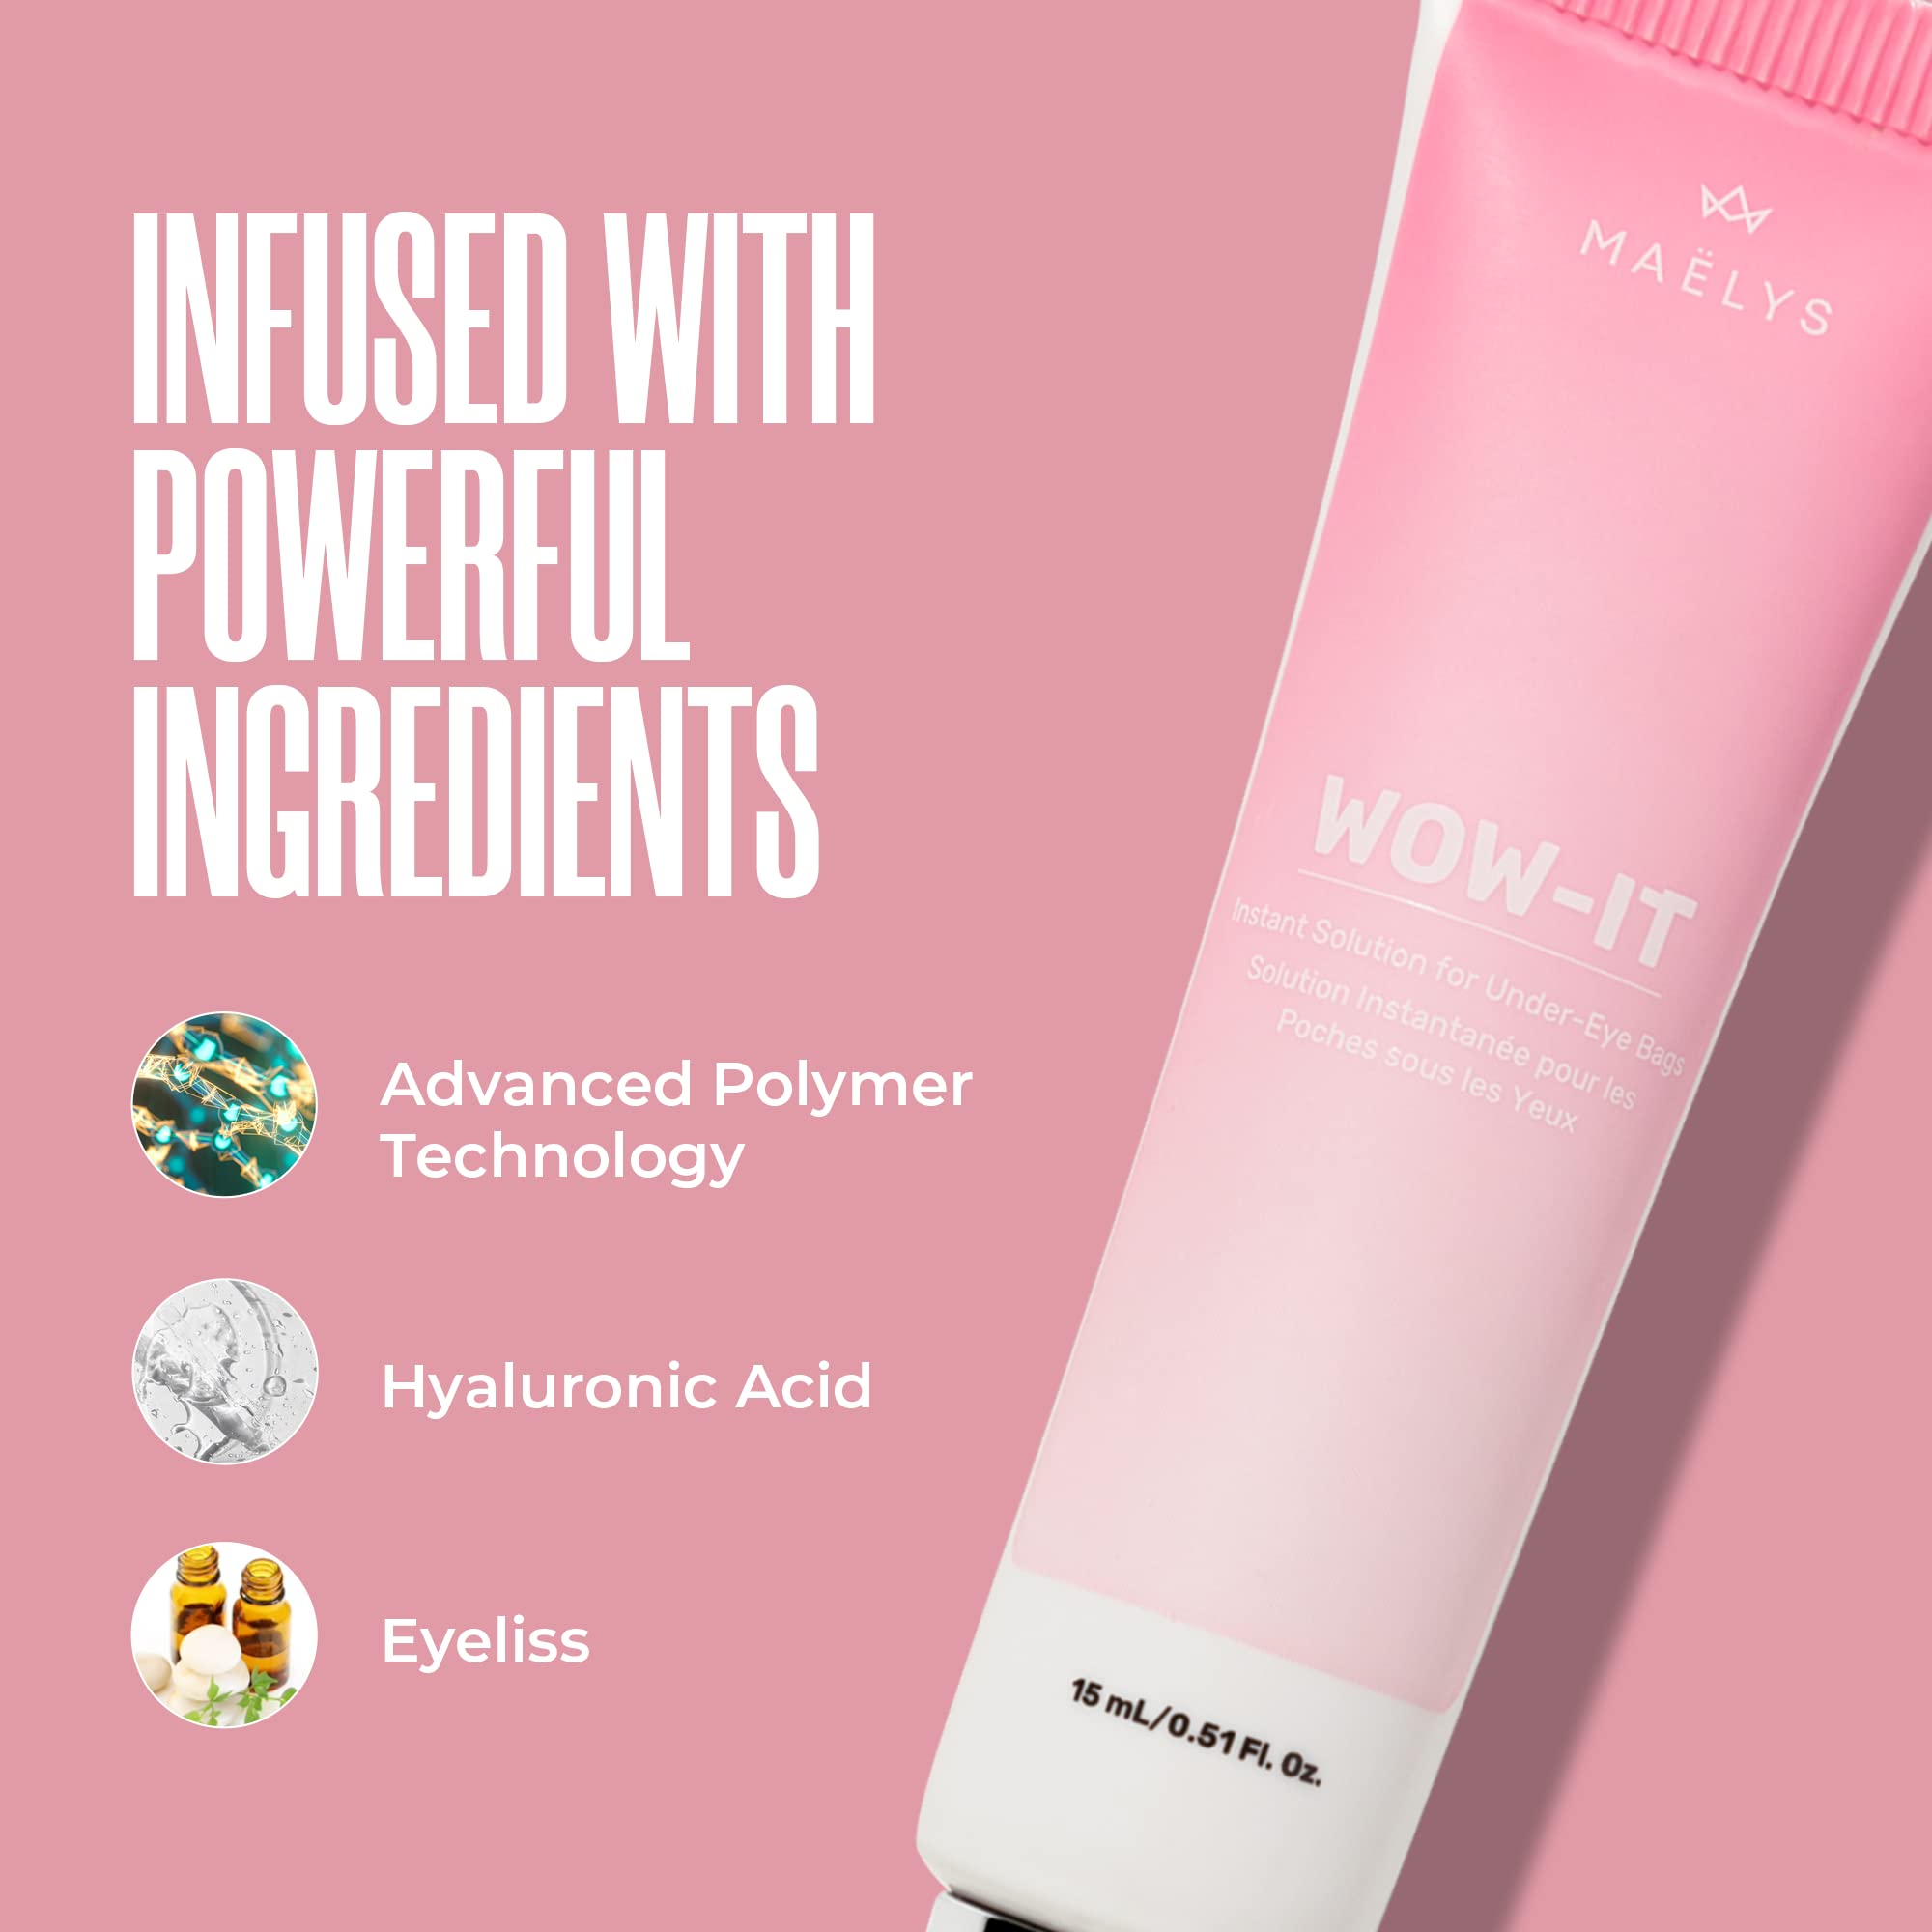 MAËLYS WOW-IT Instant Under Eye Cream - Helps to Instantly Reduce The Puffy Eye Look and Moisturize Under-Eye Skin For A Firm Look